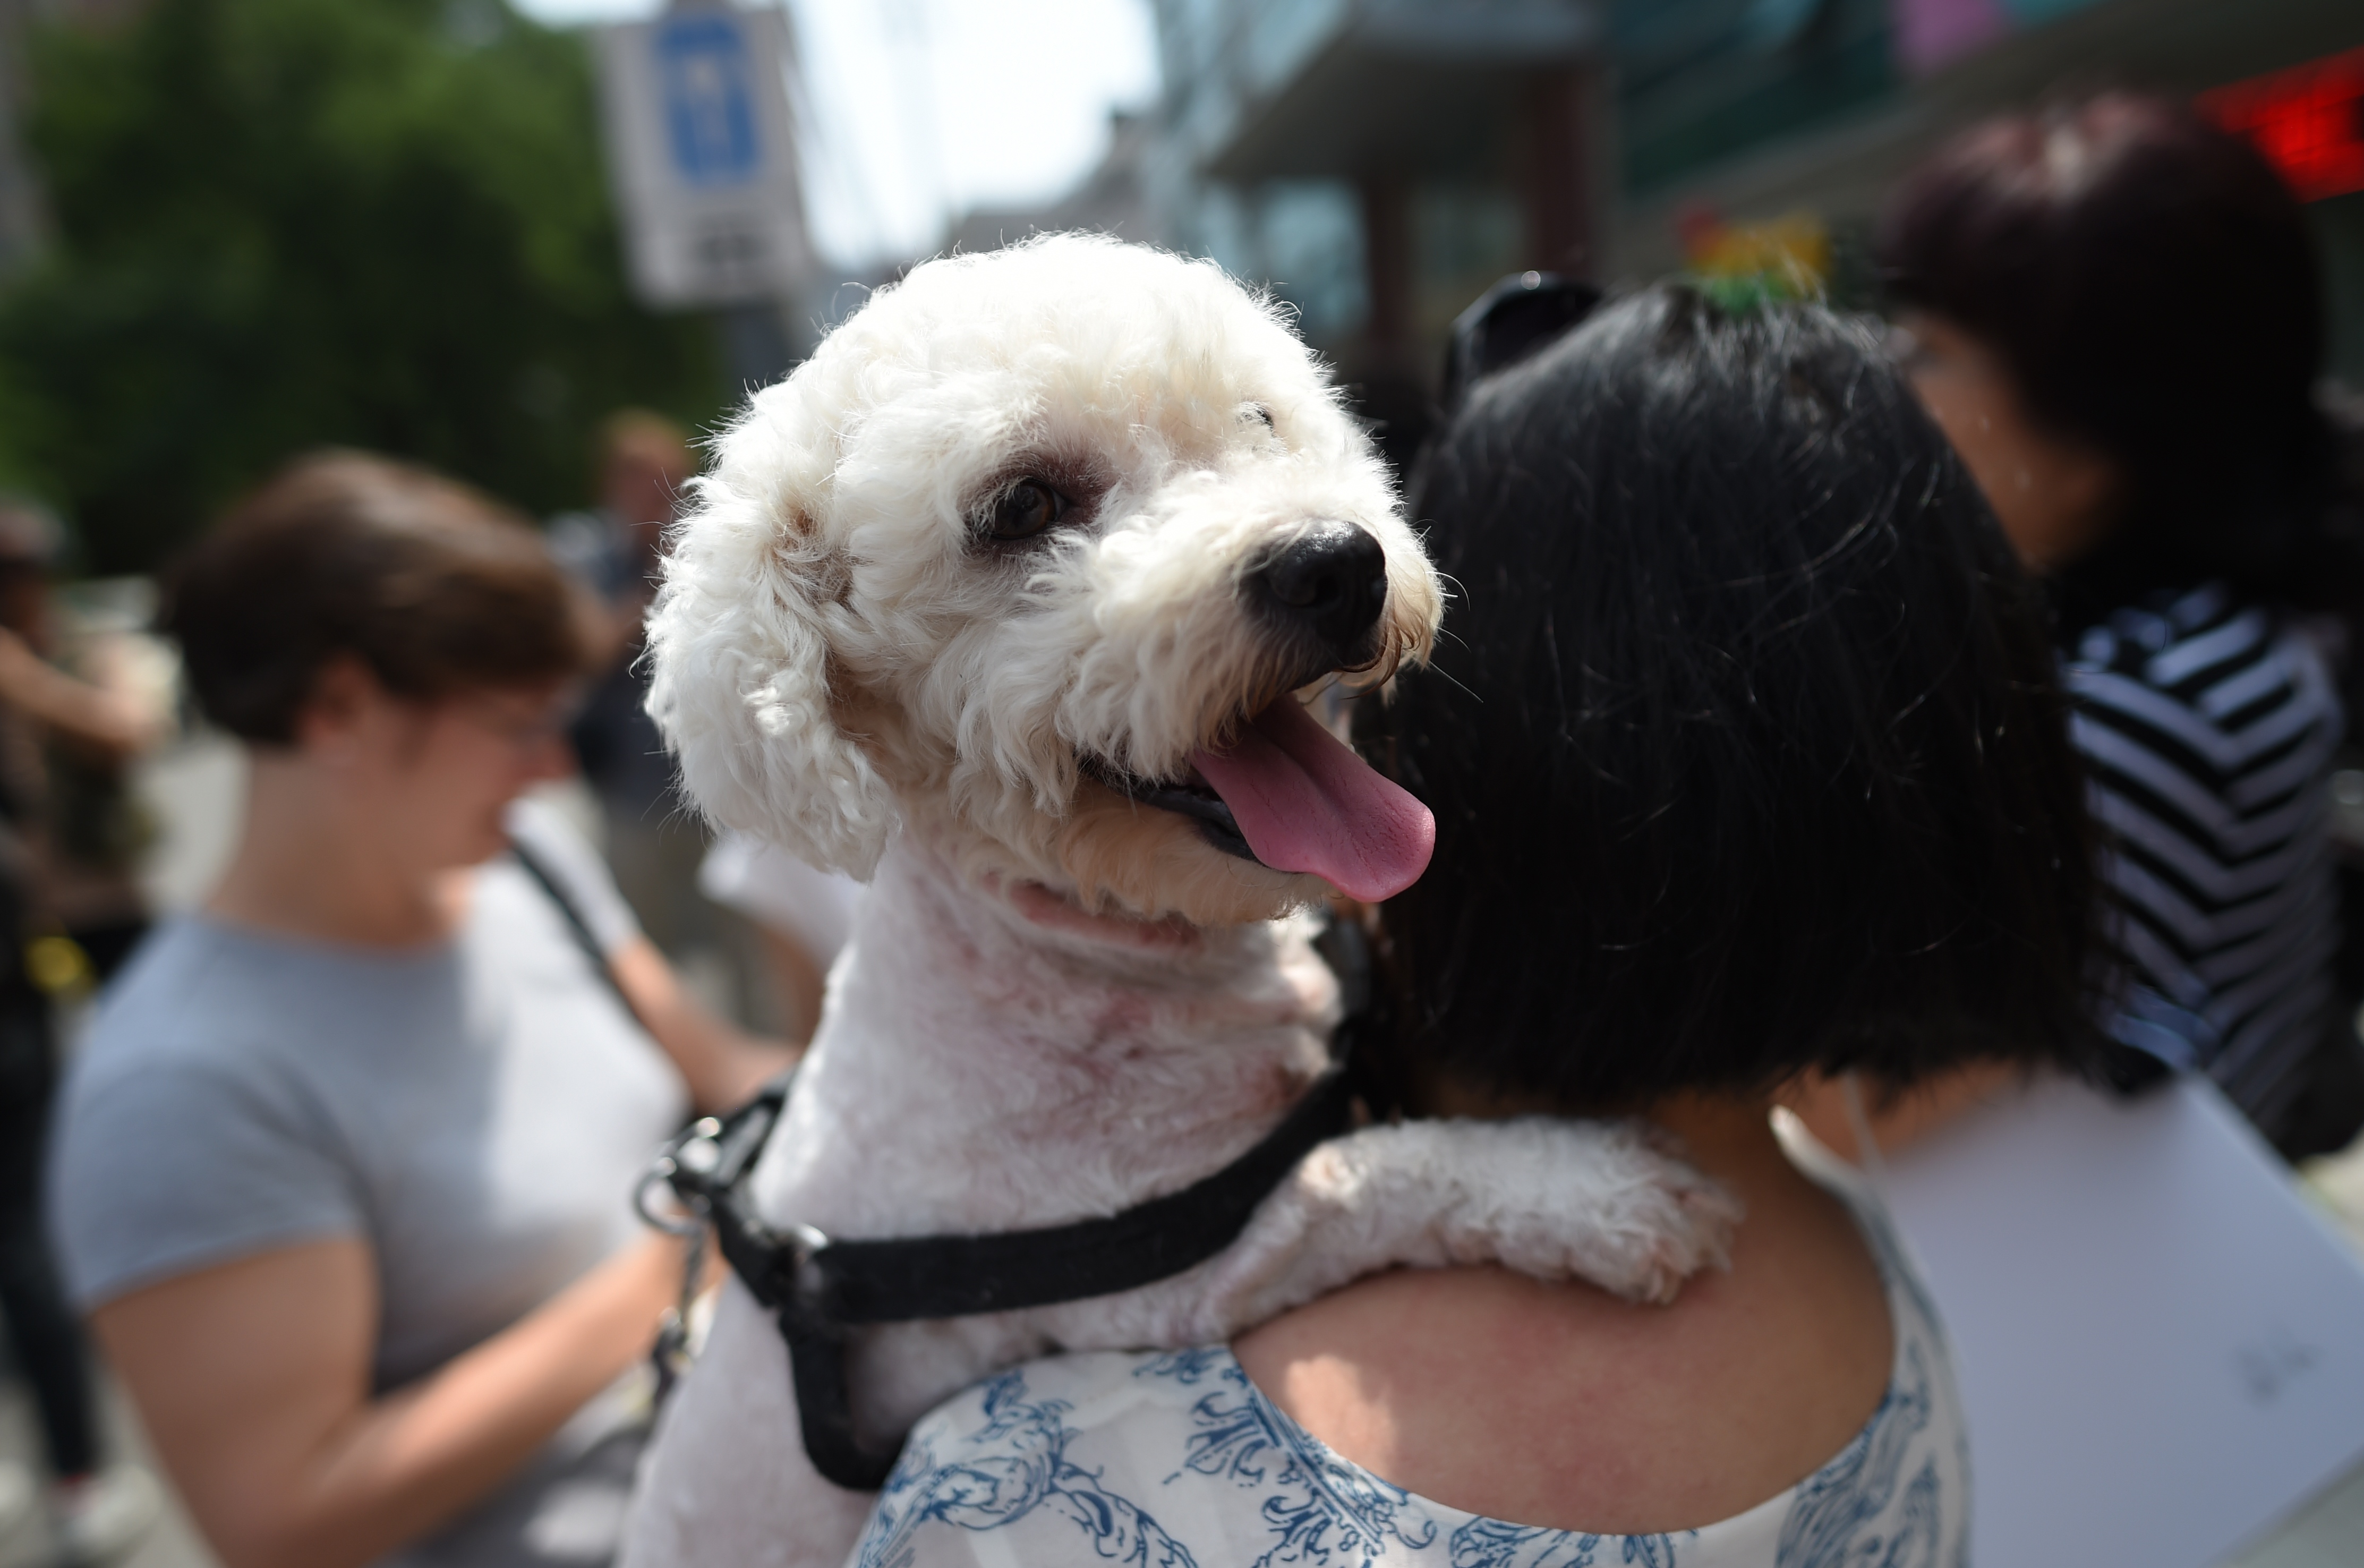 An animal activist carries her dog outside the Yulin government office in Beijing on June 10, 2016.  A group of Chinese and international animal activists presented a petition signed by 11 million people calling on authorities to end the annual Yulin dog meat festival. The activists claim thousands of dogs, many of the them stolen from pet owners, are slaughtered each year for the  festival, which begins in the southern city of Yulin on June 21. / AFP PHOTO / GREG BAKER